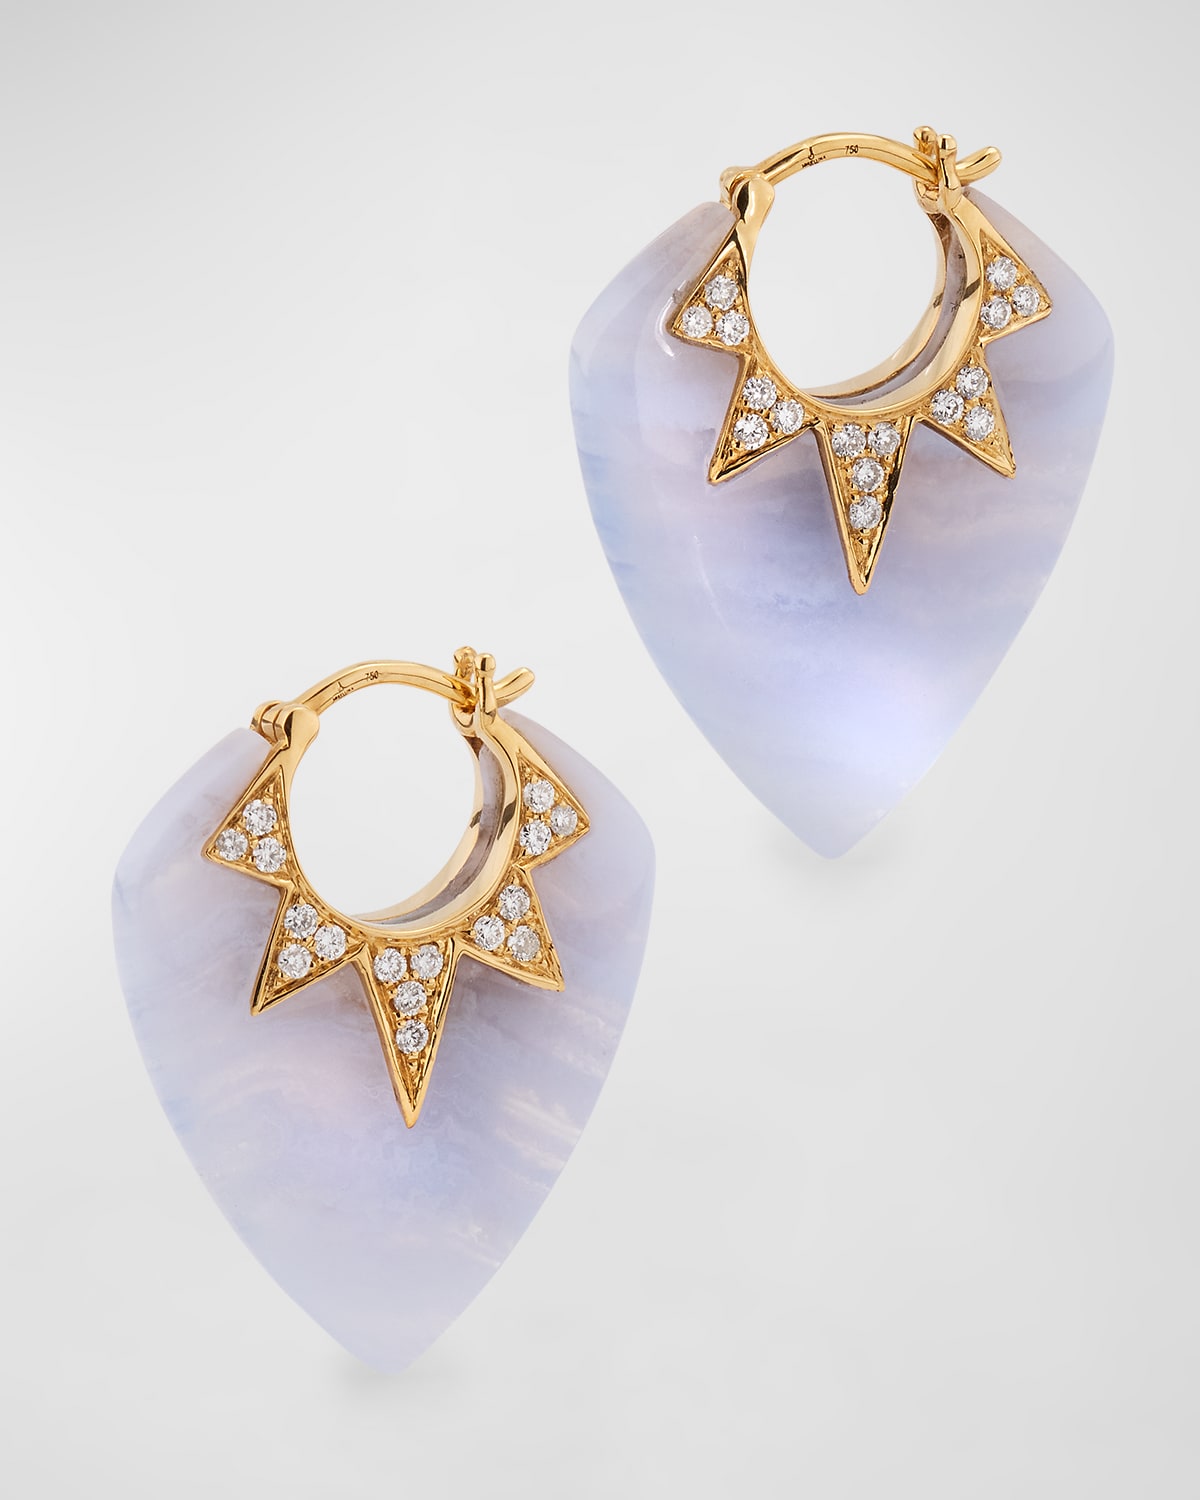 18K Yellow Gold Earrings with Blue Lace Agate and GH-SI Diamonds. 25x20mm